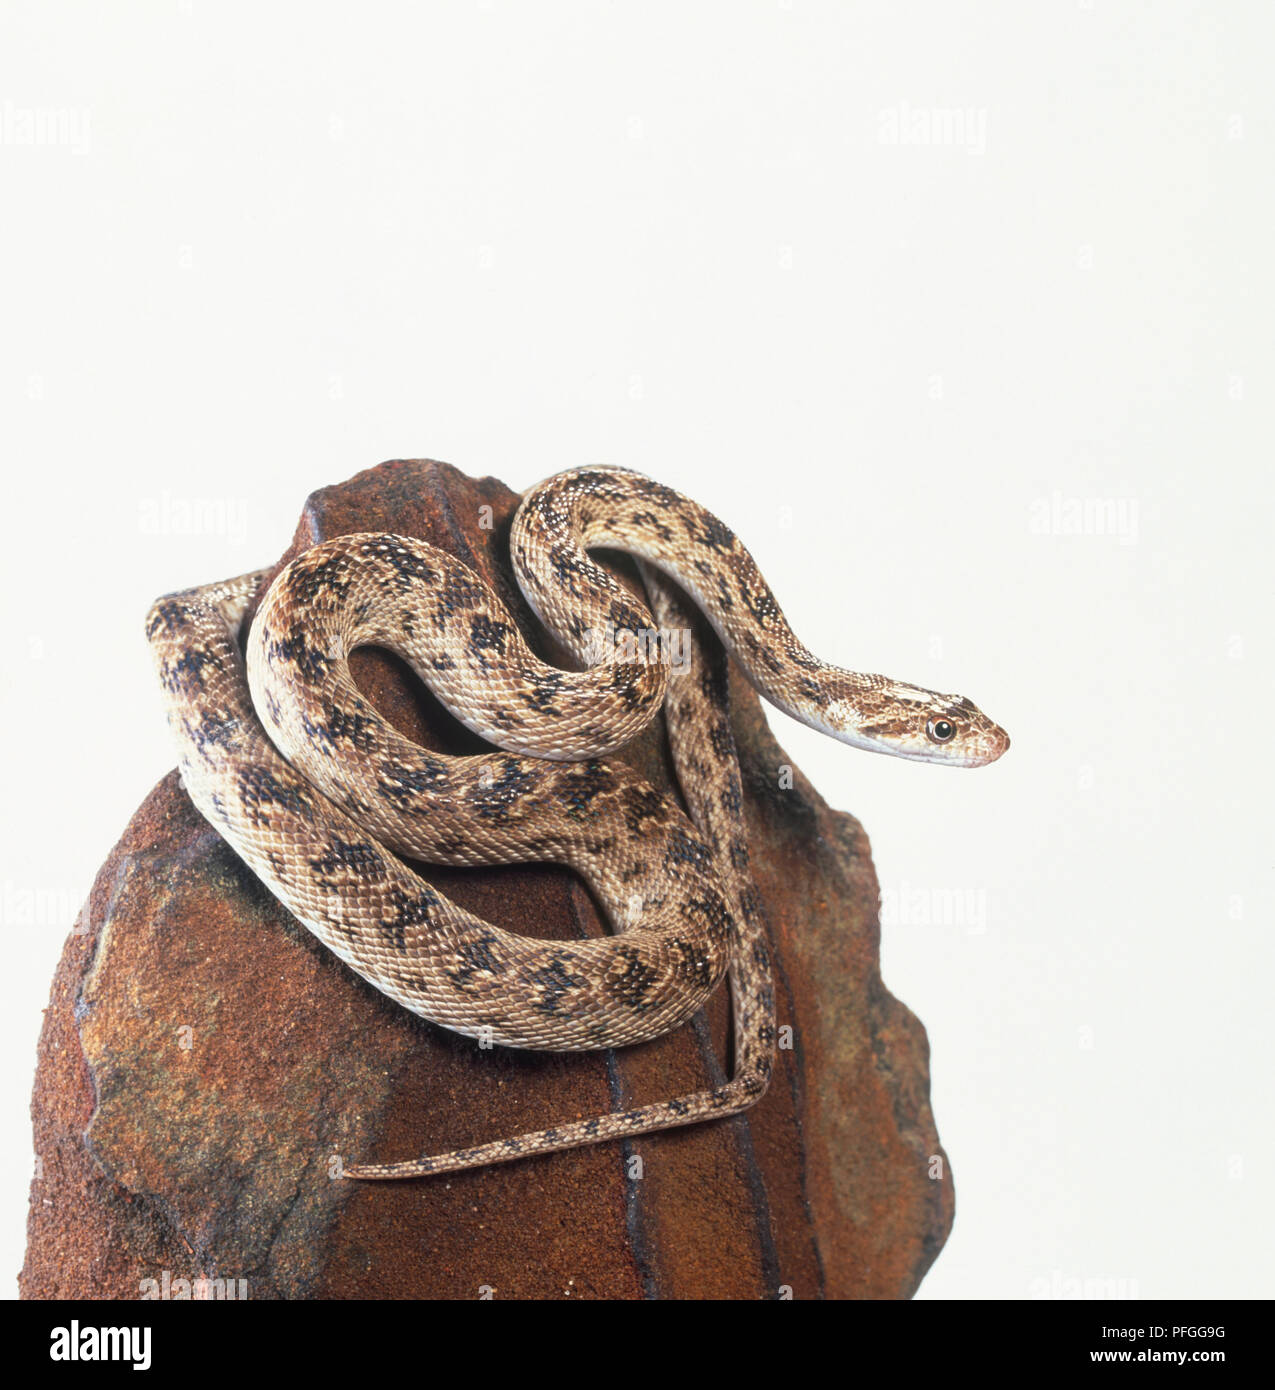 Diadem snake (Spalerosophis diadema), curled up on a rock Stock Photo